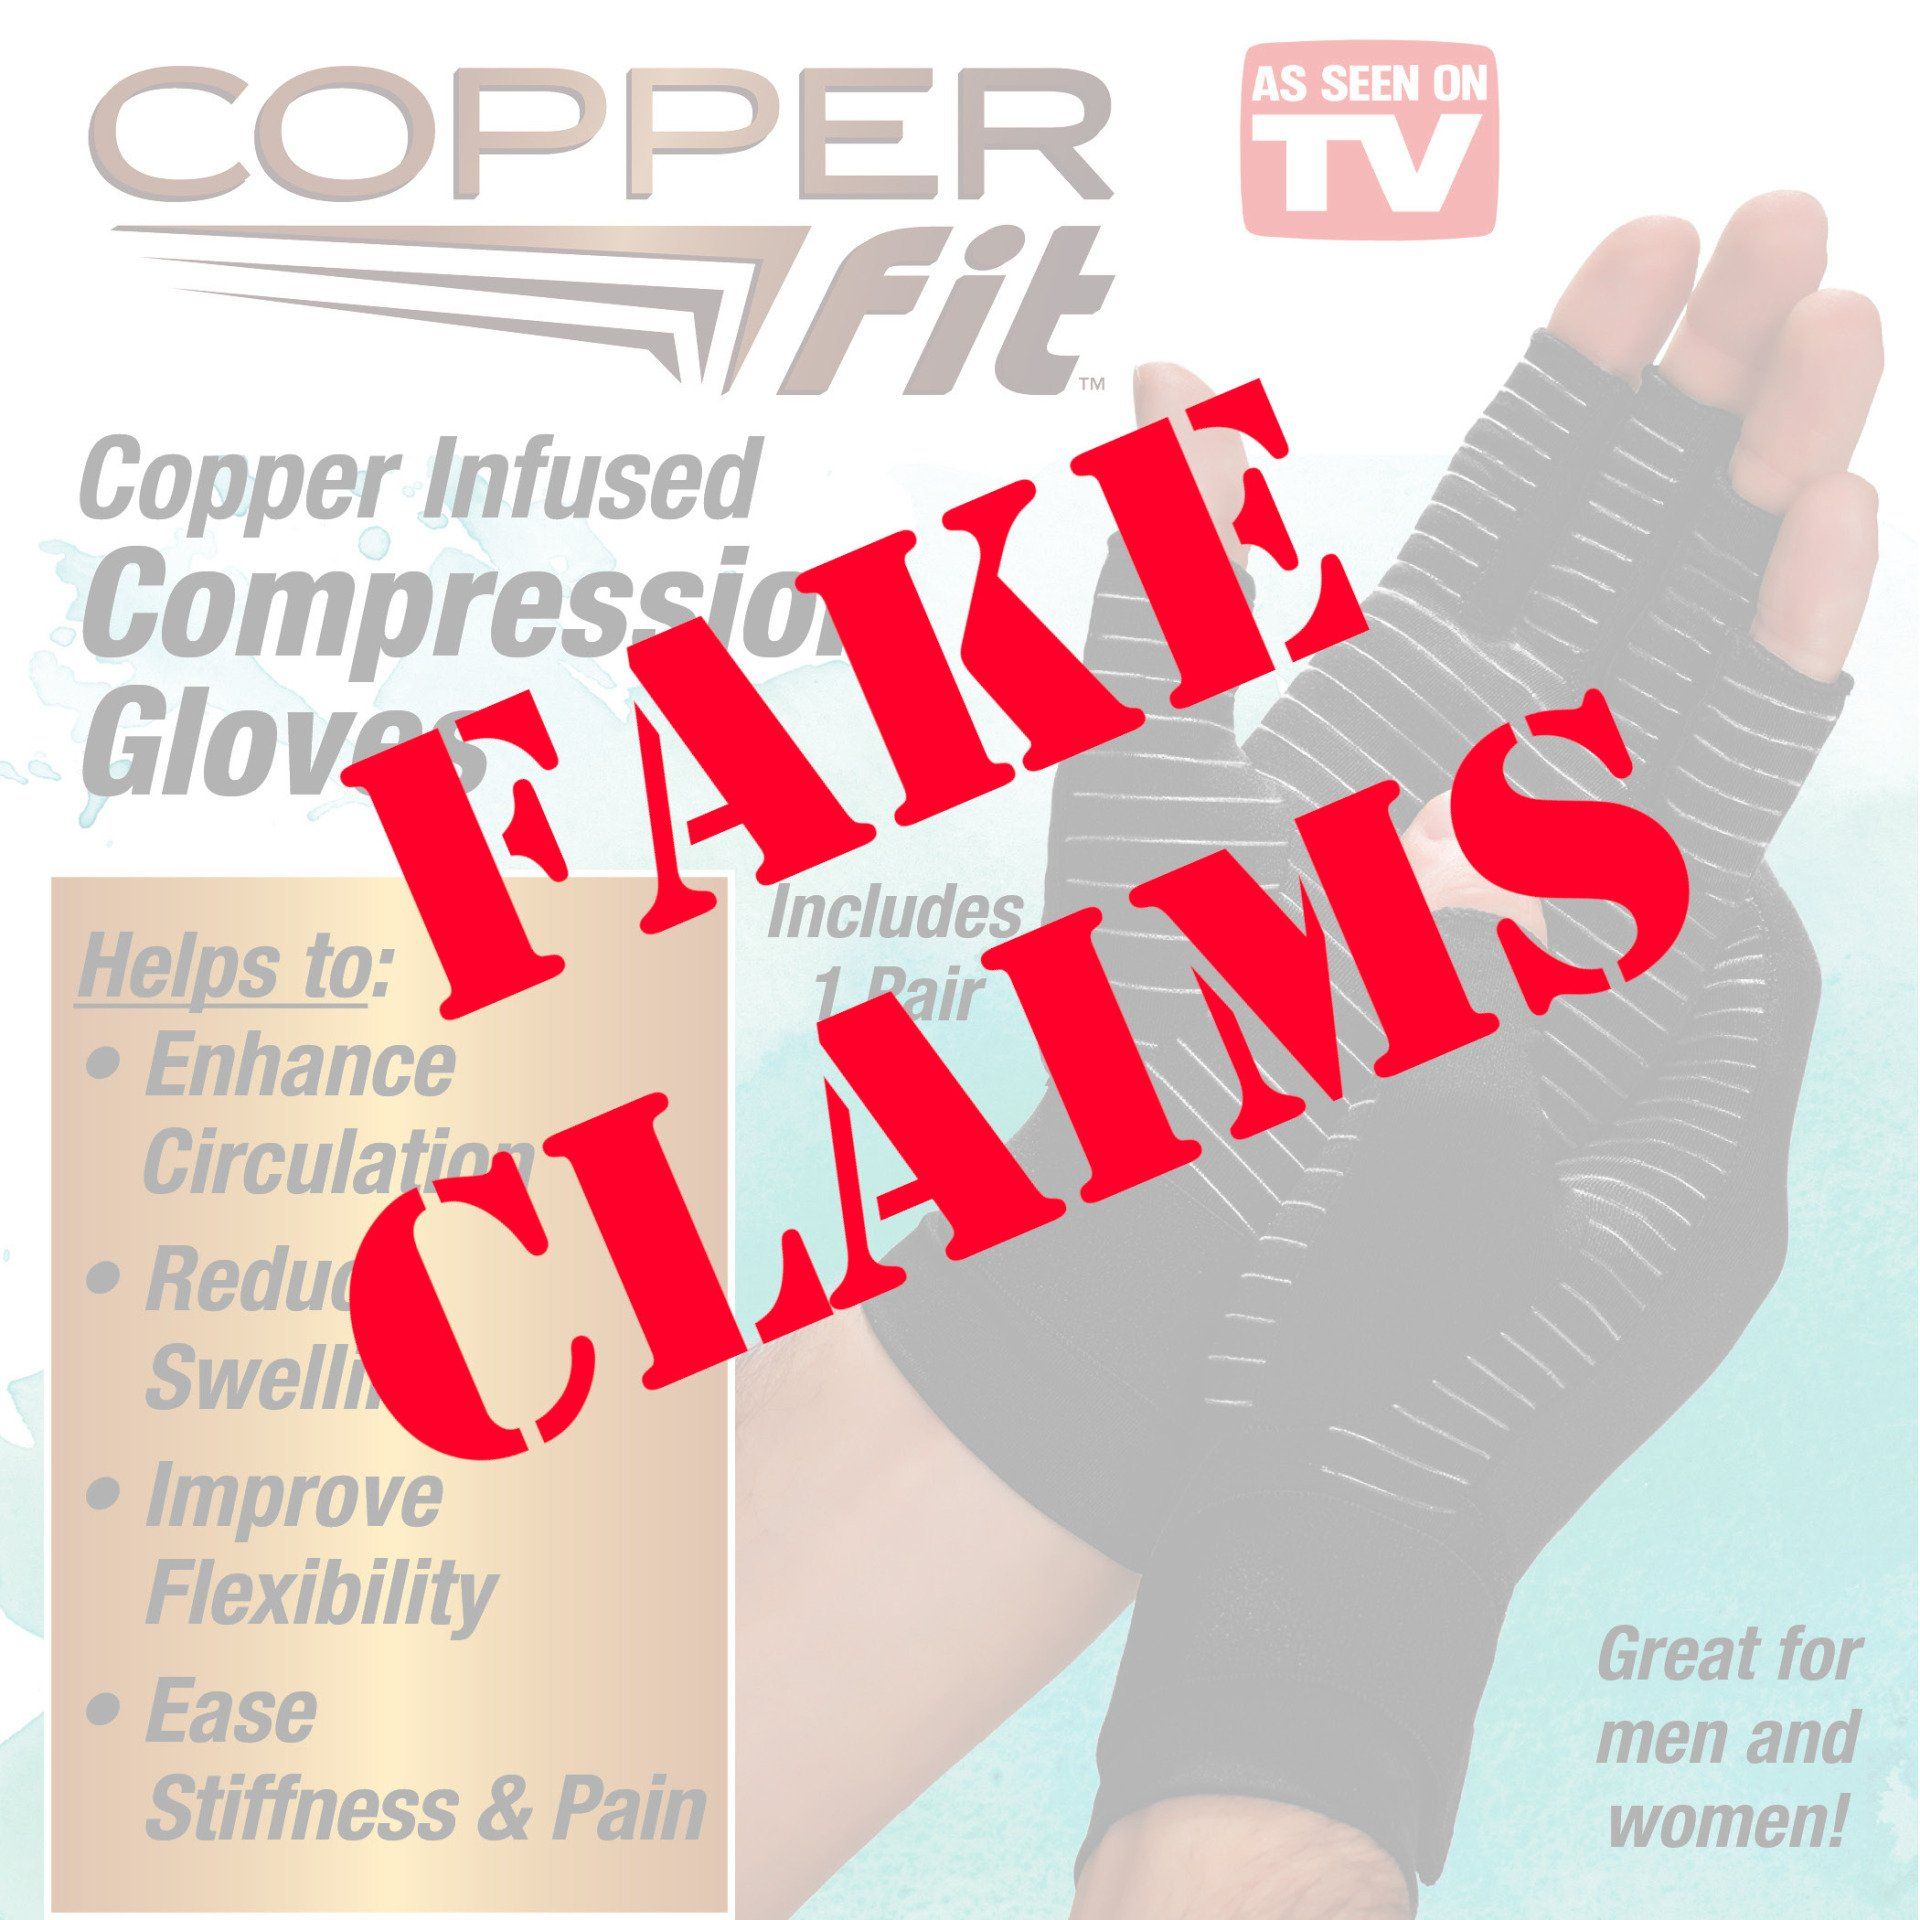 COPPER FIT FAKE CLAIMS